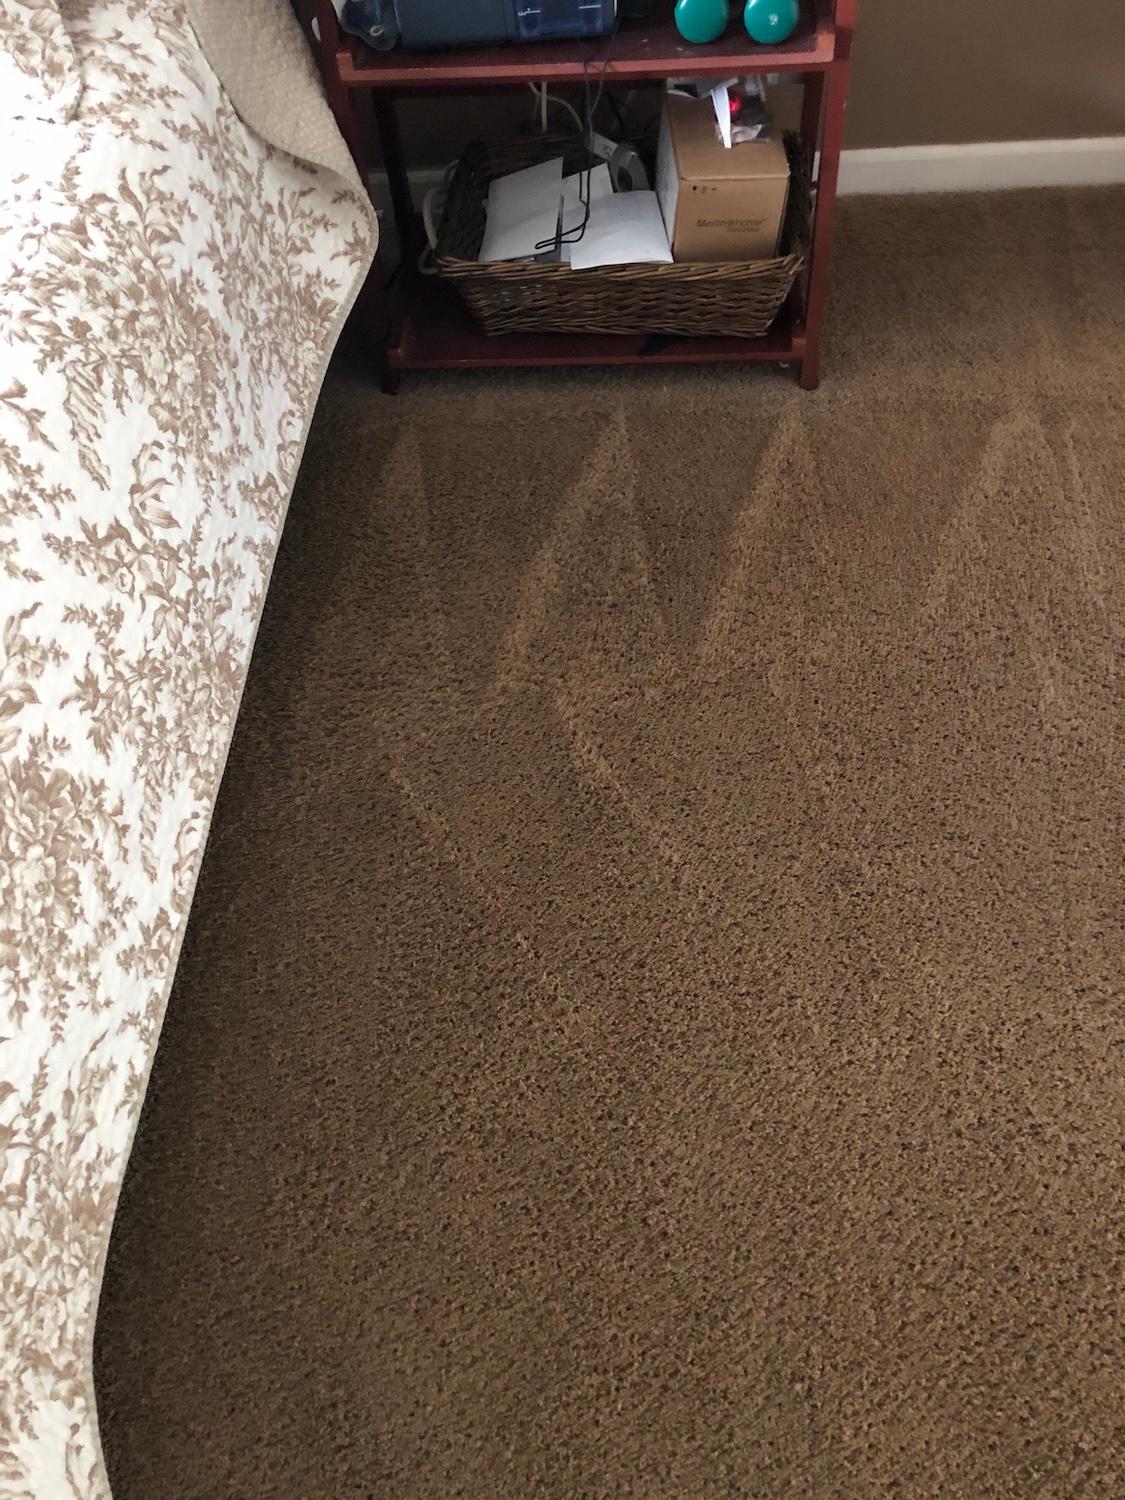 Carpet stain removal in Upland/Rancho